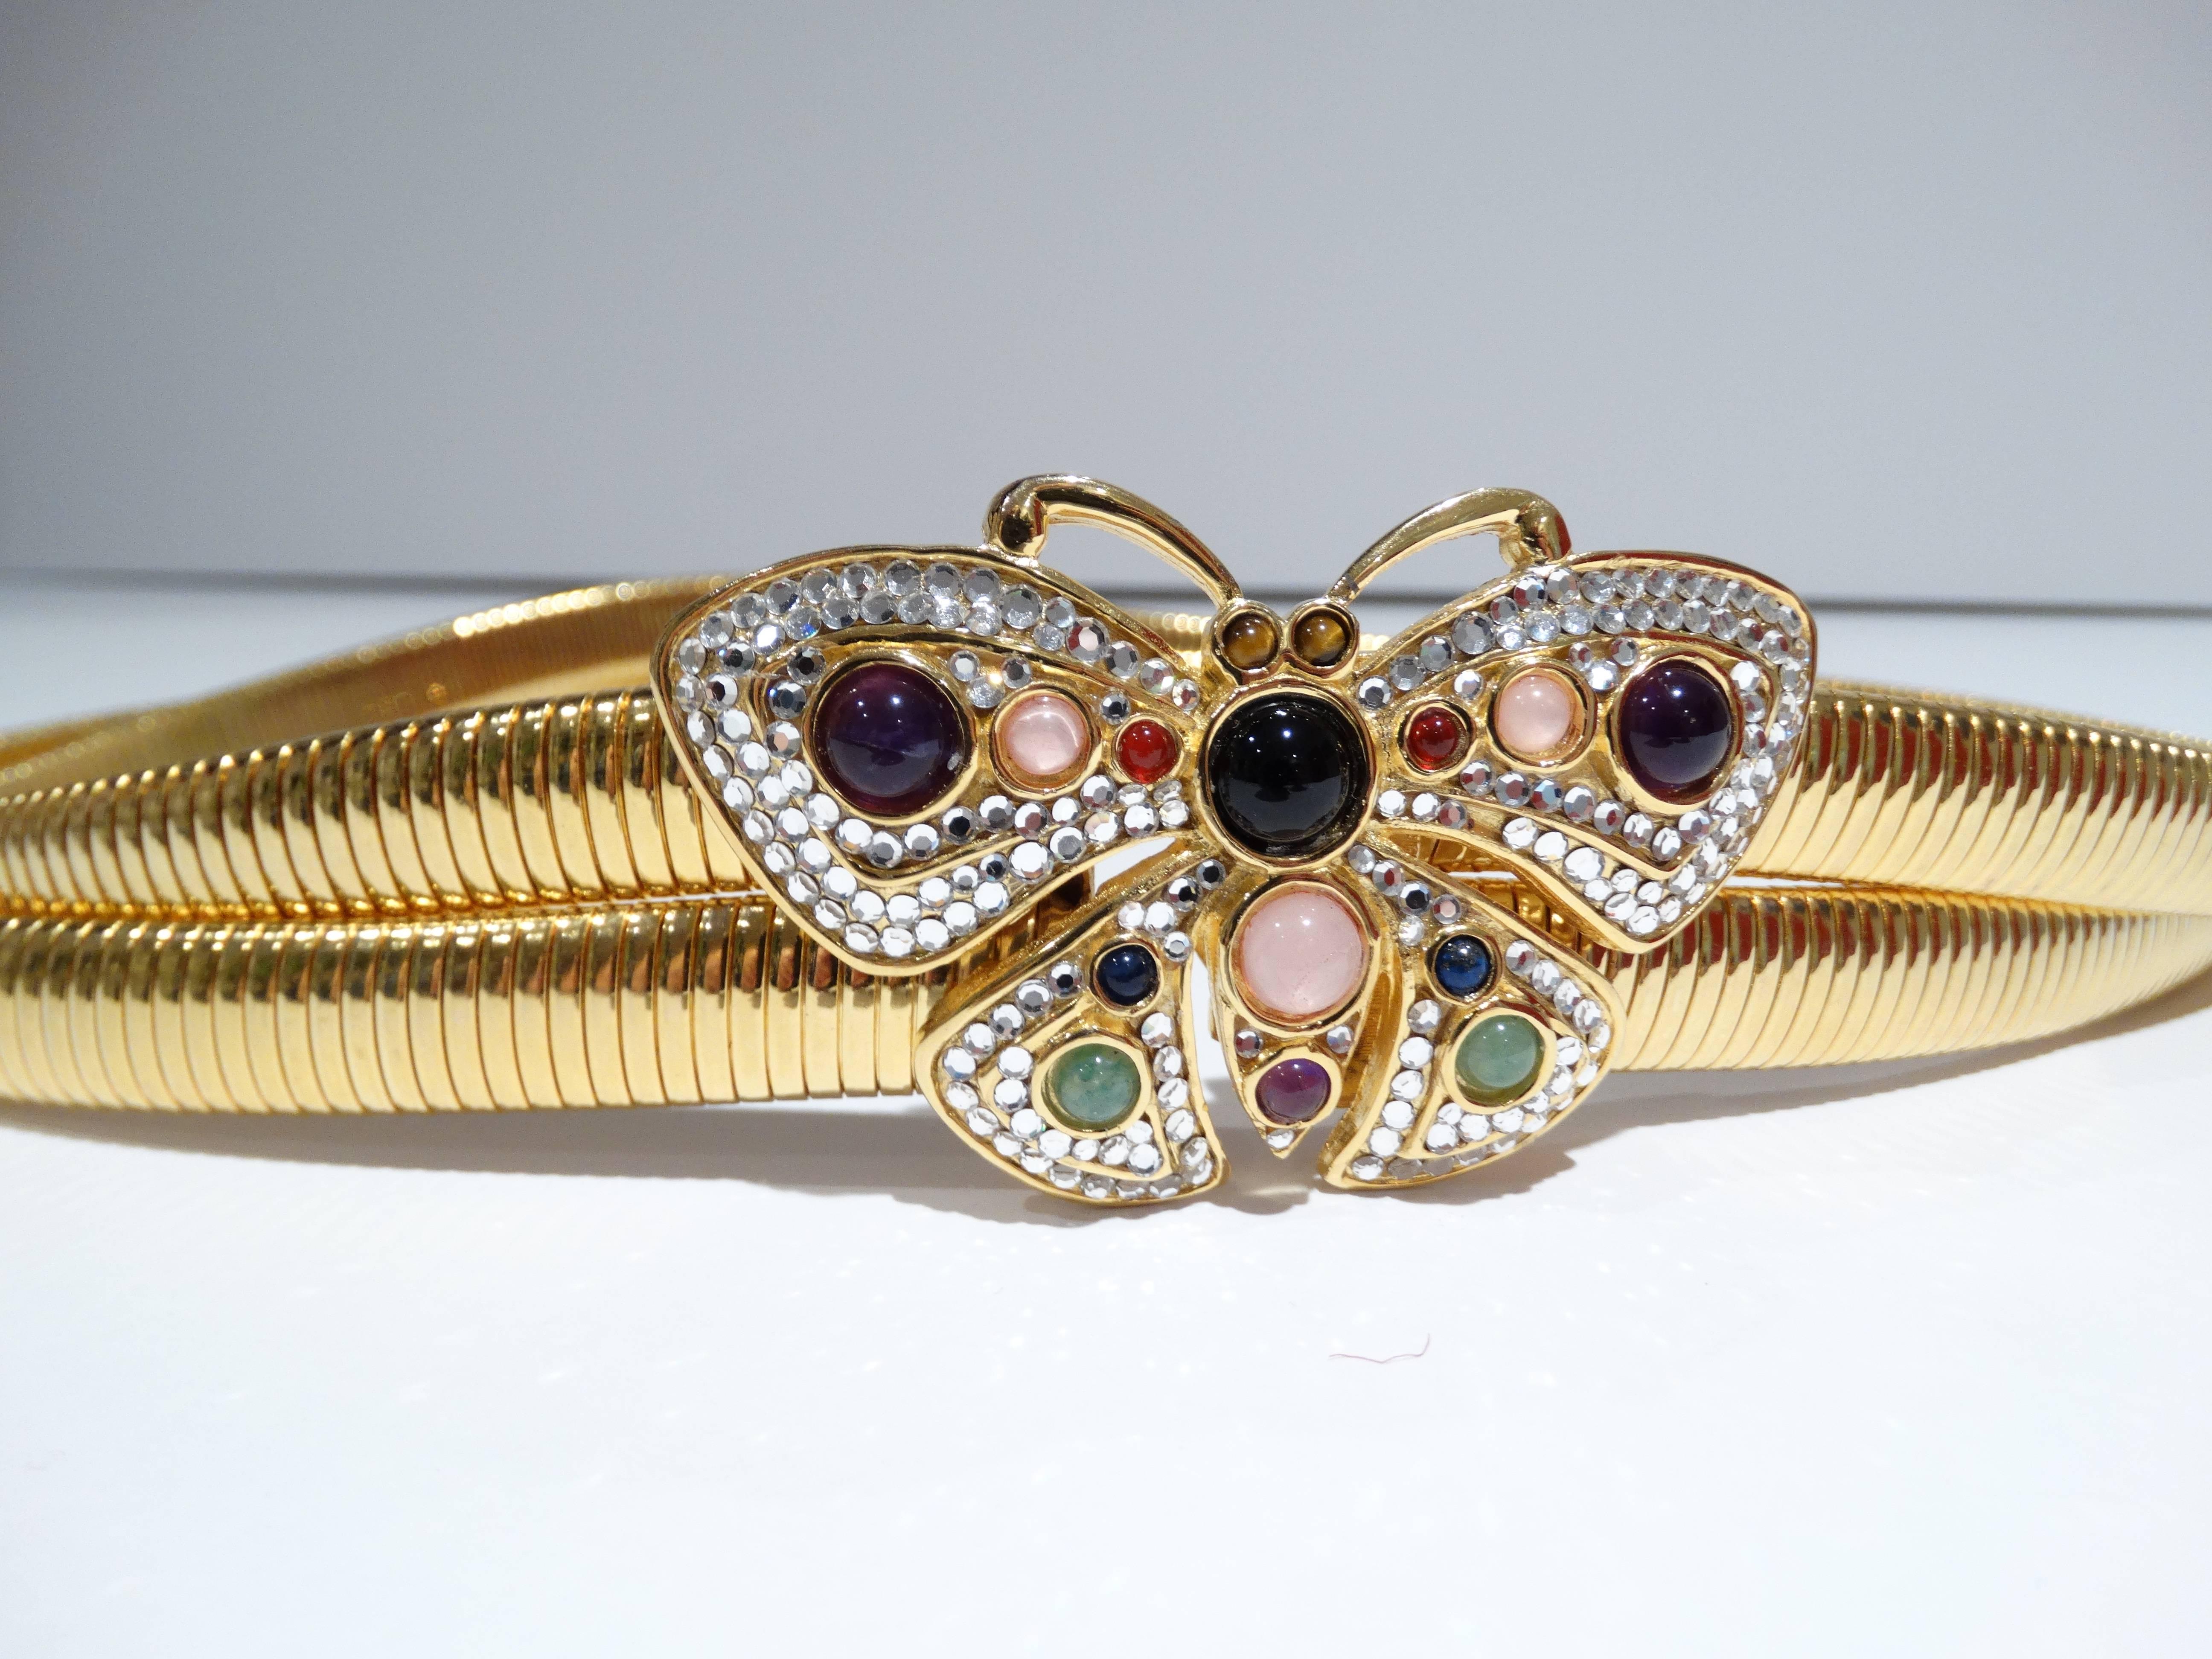 An adorable Judith Leiber butterfly belt encrusted with rose quartz, jade, black onyx and amethyst stones surrounded by clear crystals sit atop a gold tone double banded stretch belt. Circa 1980's belt measures 26 to 27 inches long. Butterfly